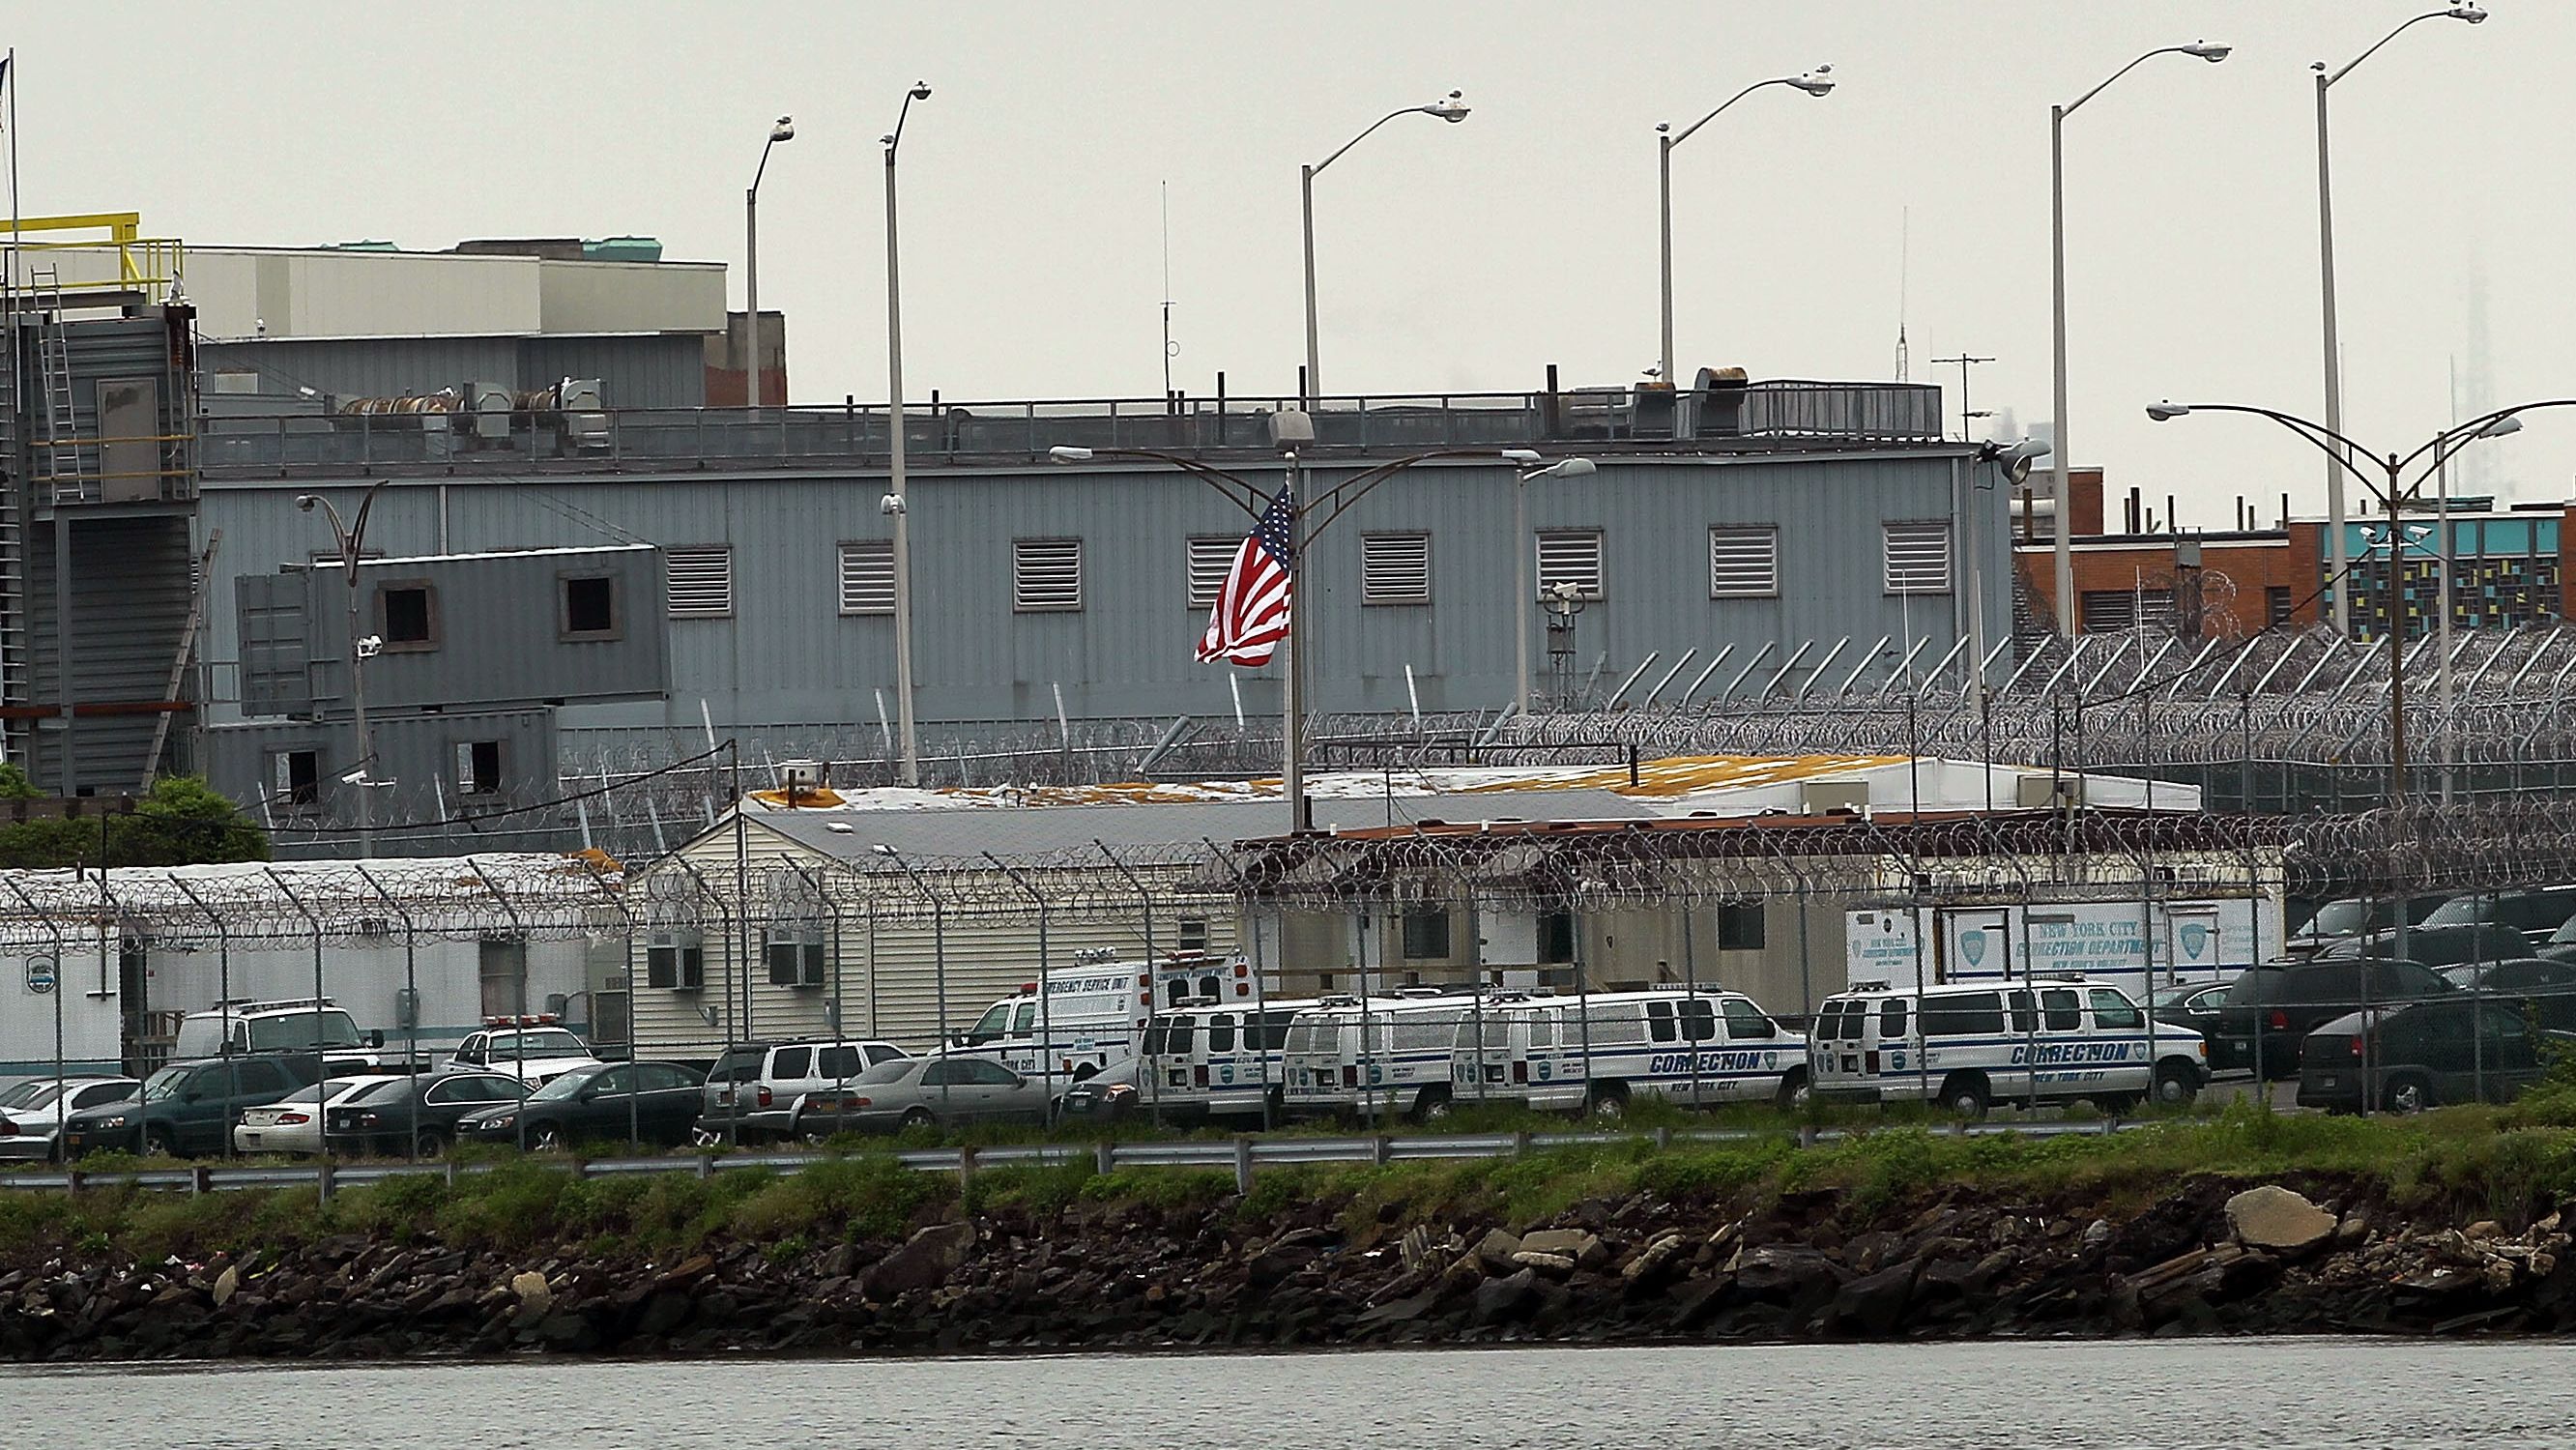 The Rikers Island prison complex houses jails in New York City.